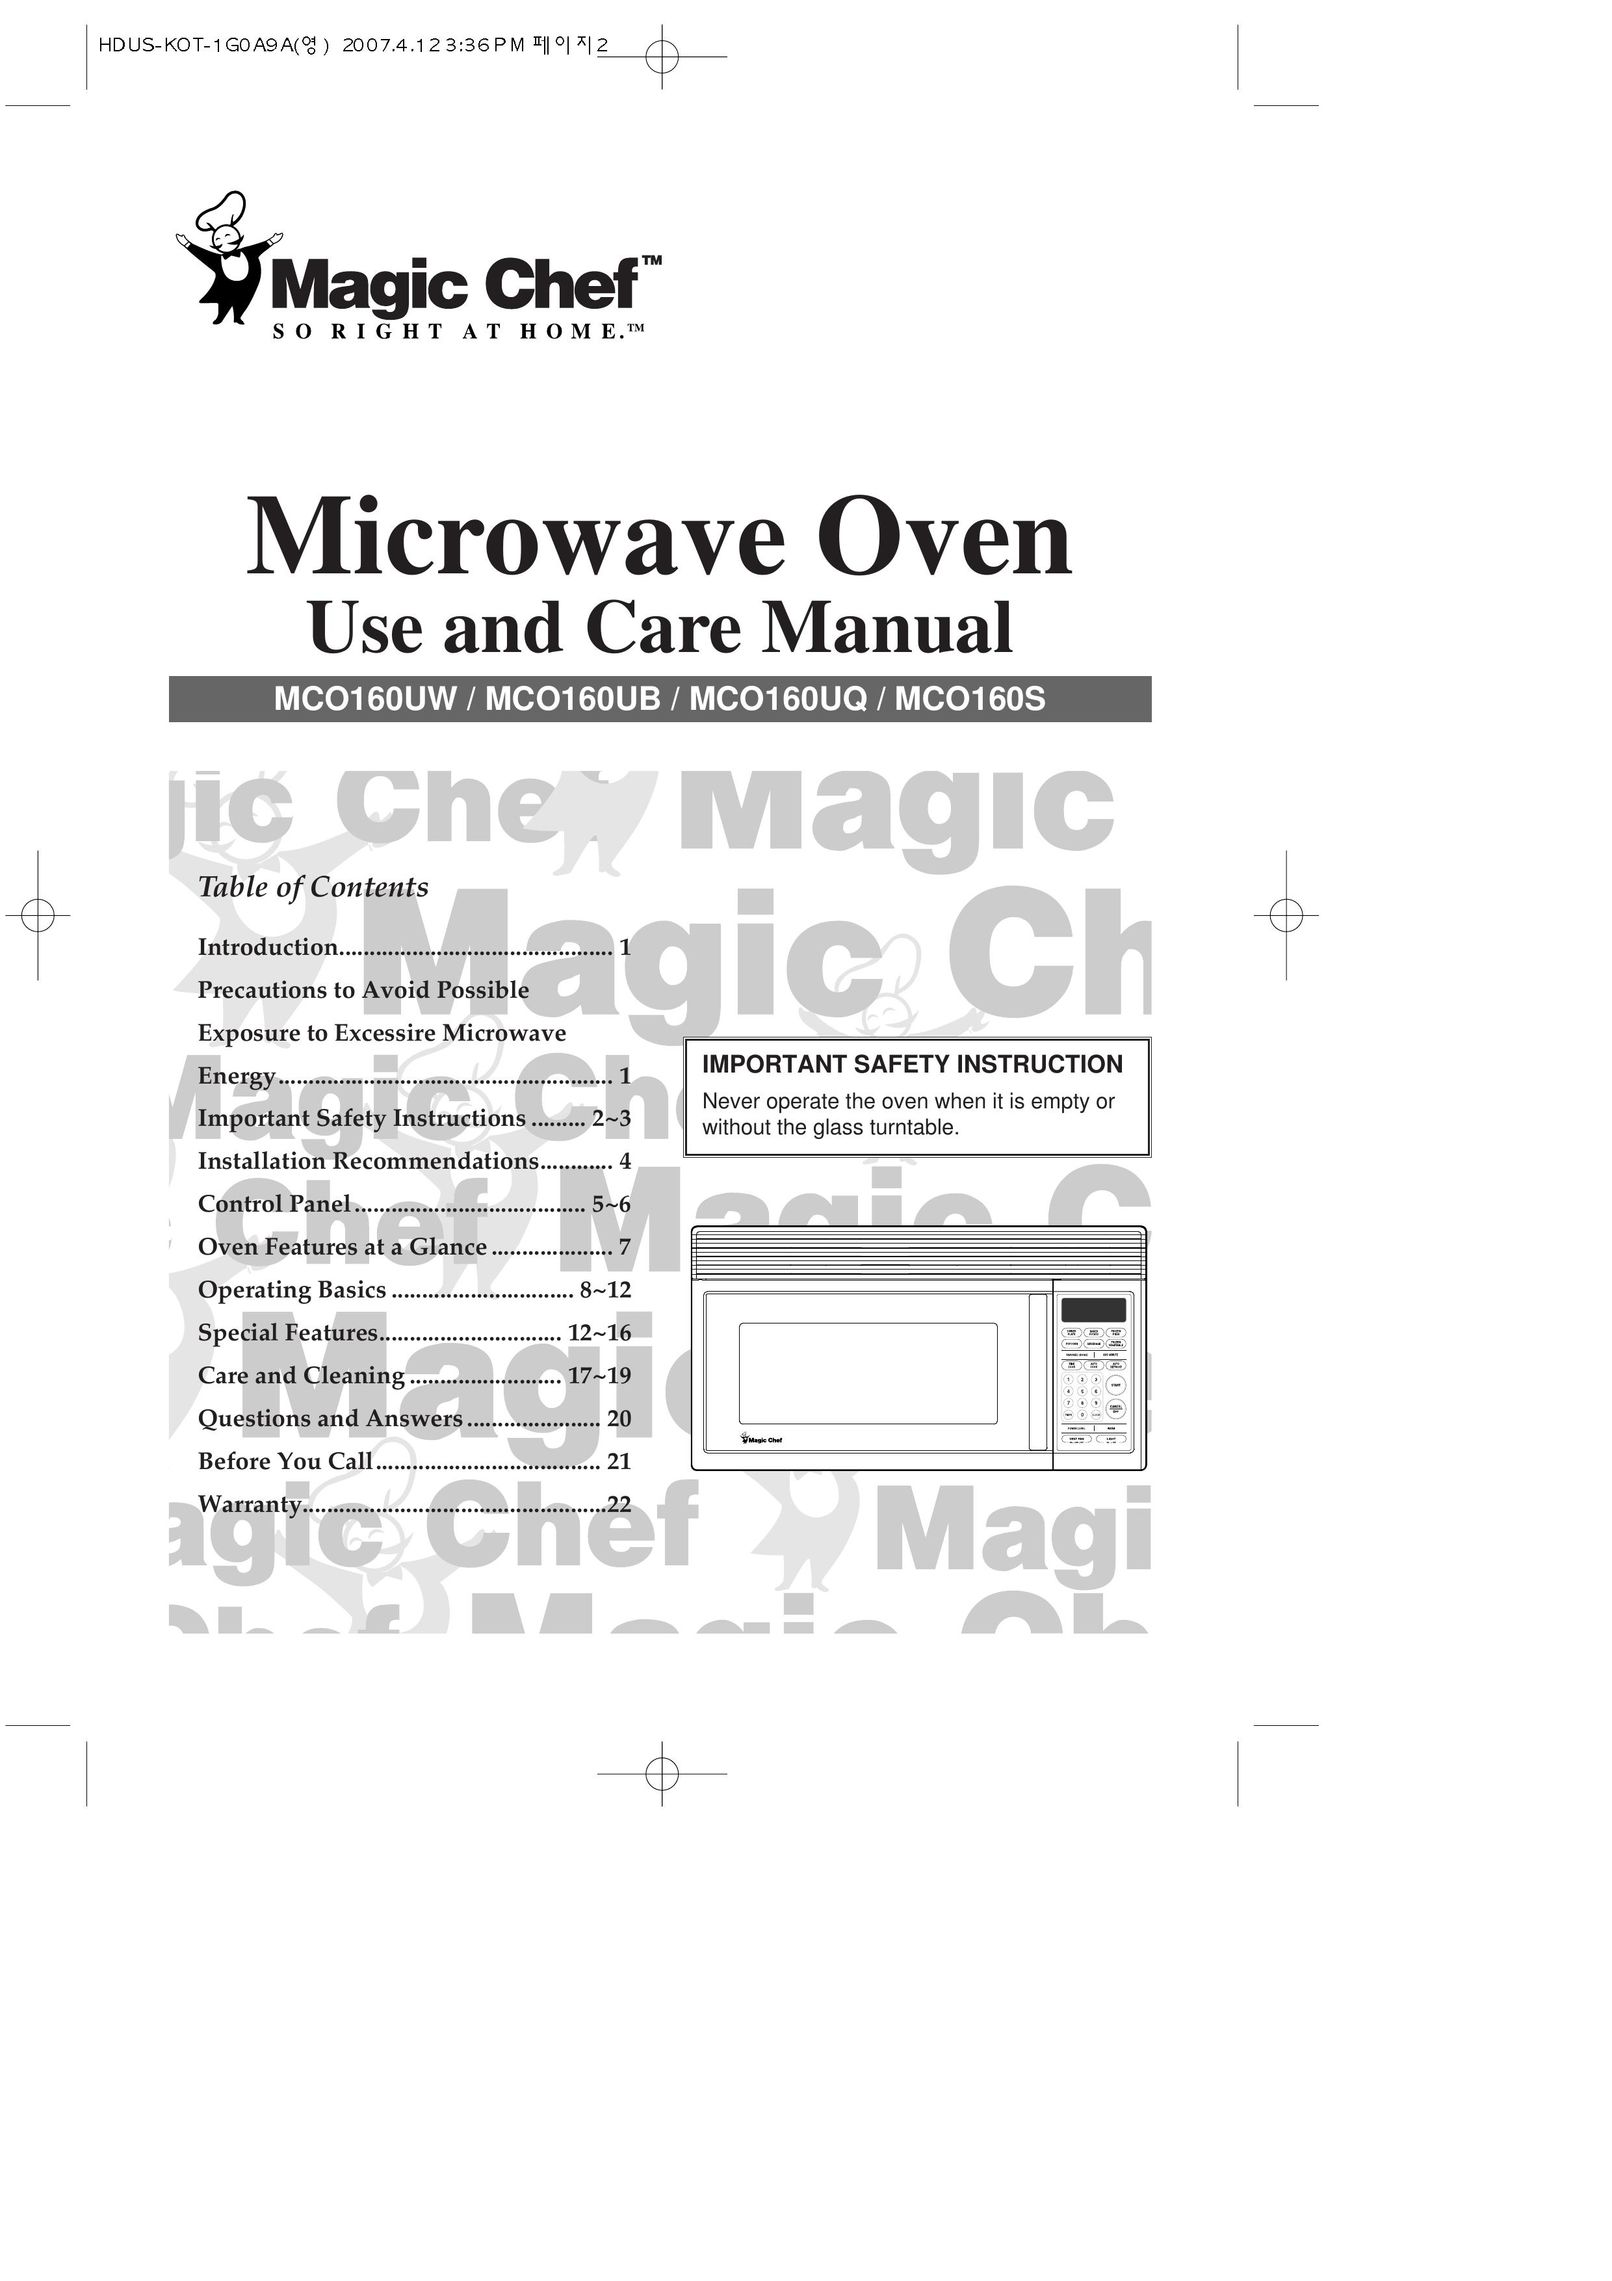 Magic Chef MCO160S Microwave Oven User Manual